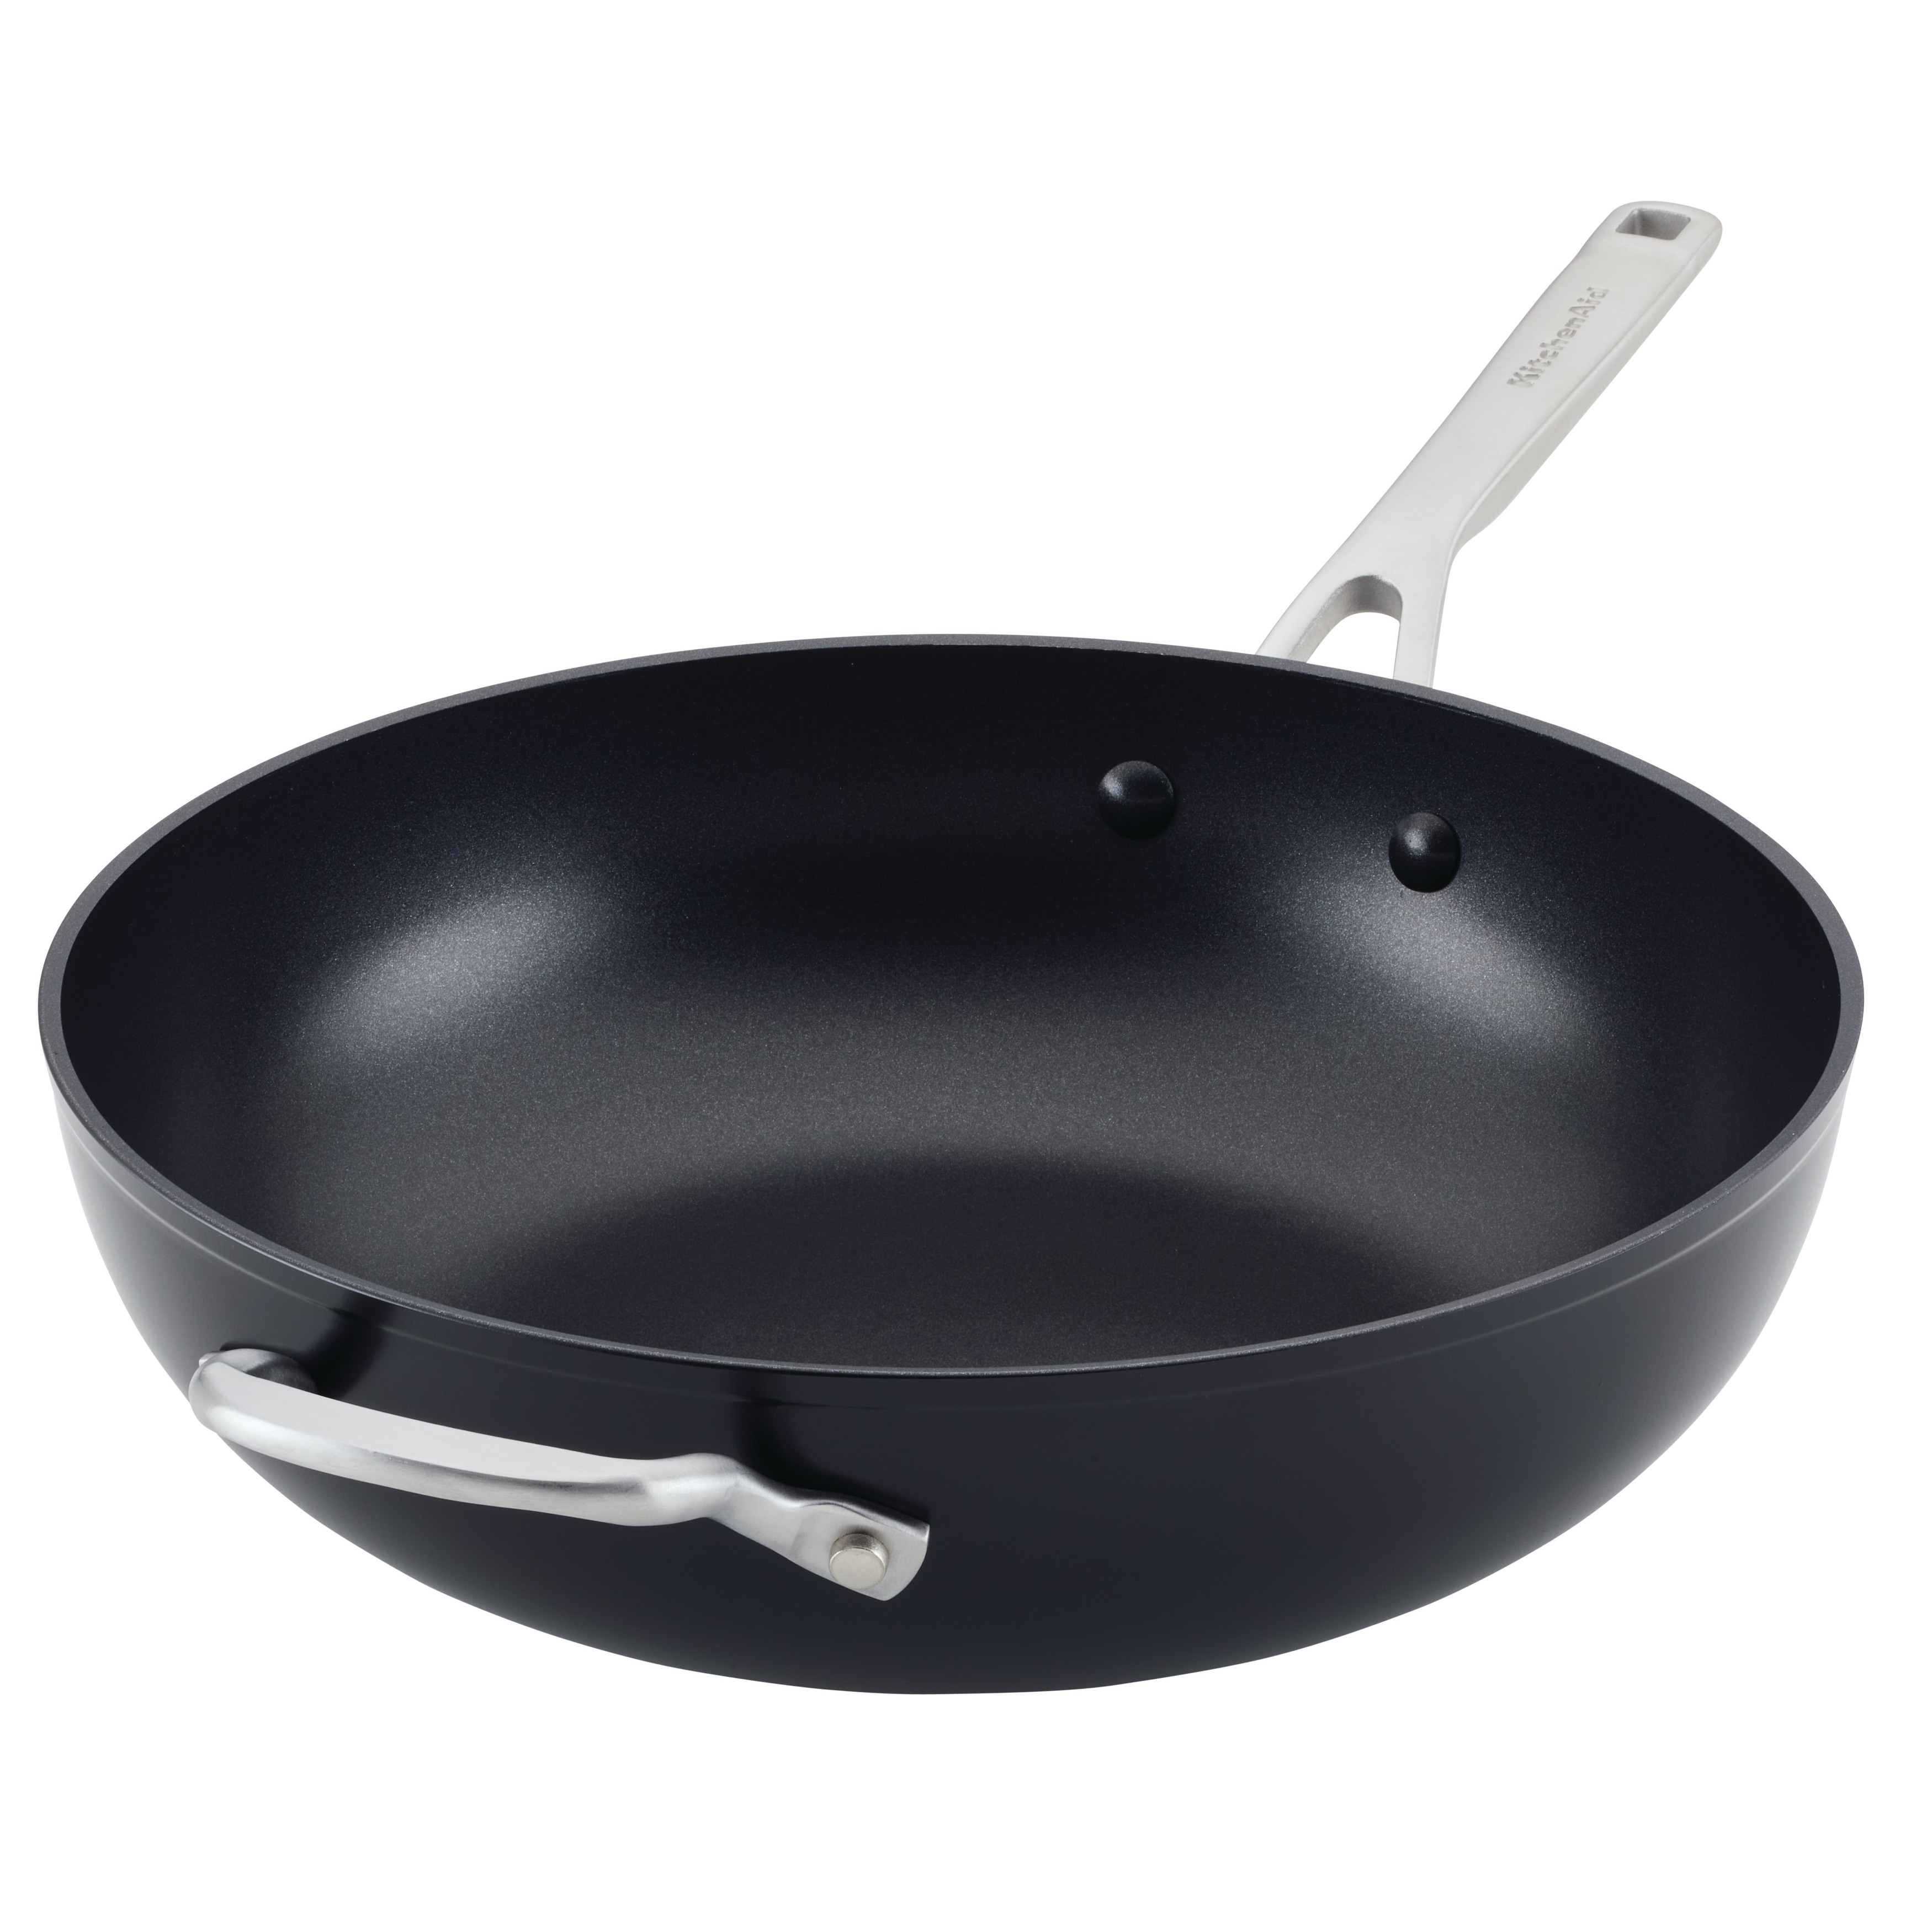 https://ak1.ostkcdn.com/images/products/is/images/direct/250c123e7a9682881e57463049e6e7d801f445ae/KitchenAid-Hard-Anodized-Induction-Nonstick-Stir-Fry-Pan---Wok-with-Helper-Handle%2C-12.25-Inch%2C-Matte-Black.jpg